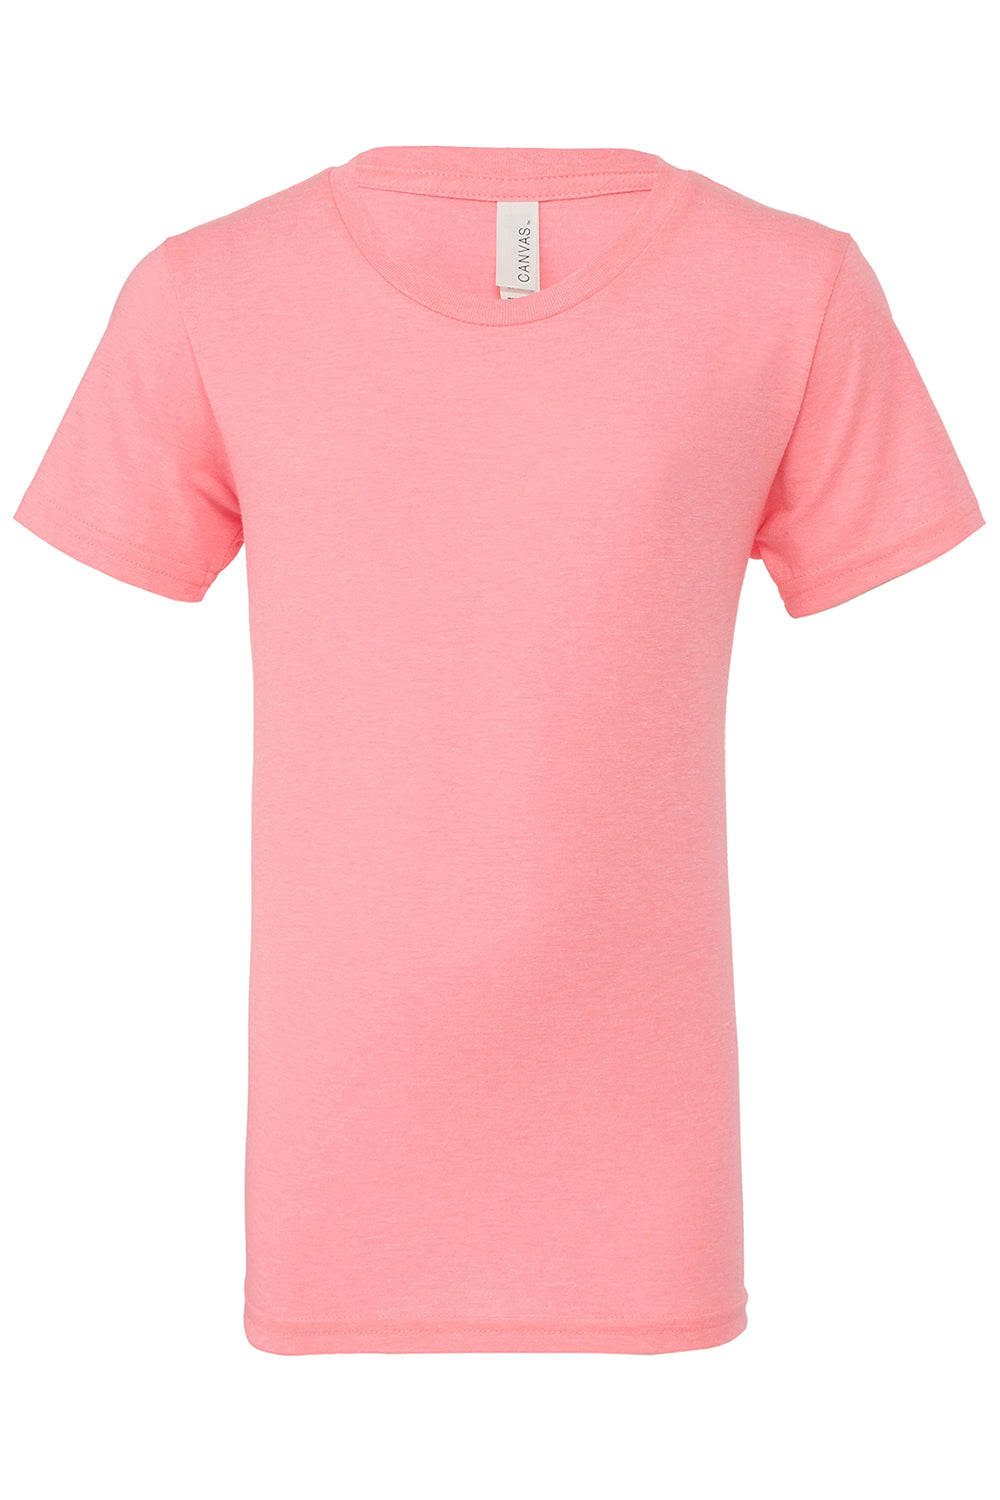 Bella + Canvas 3001Y Youth Jersey Short Sleeve Crewneck T-Shirt Neon Pink Flat Front